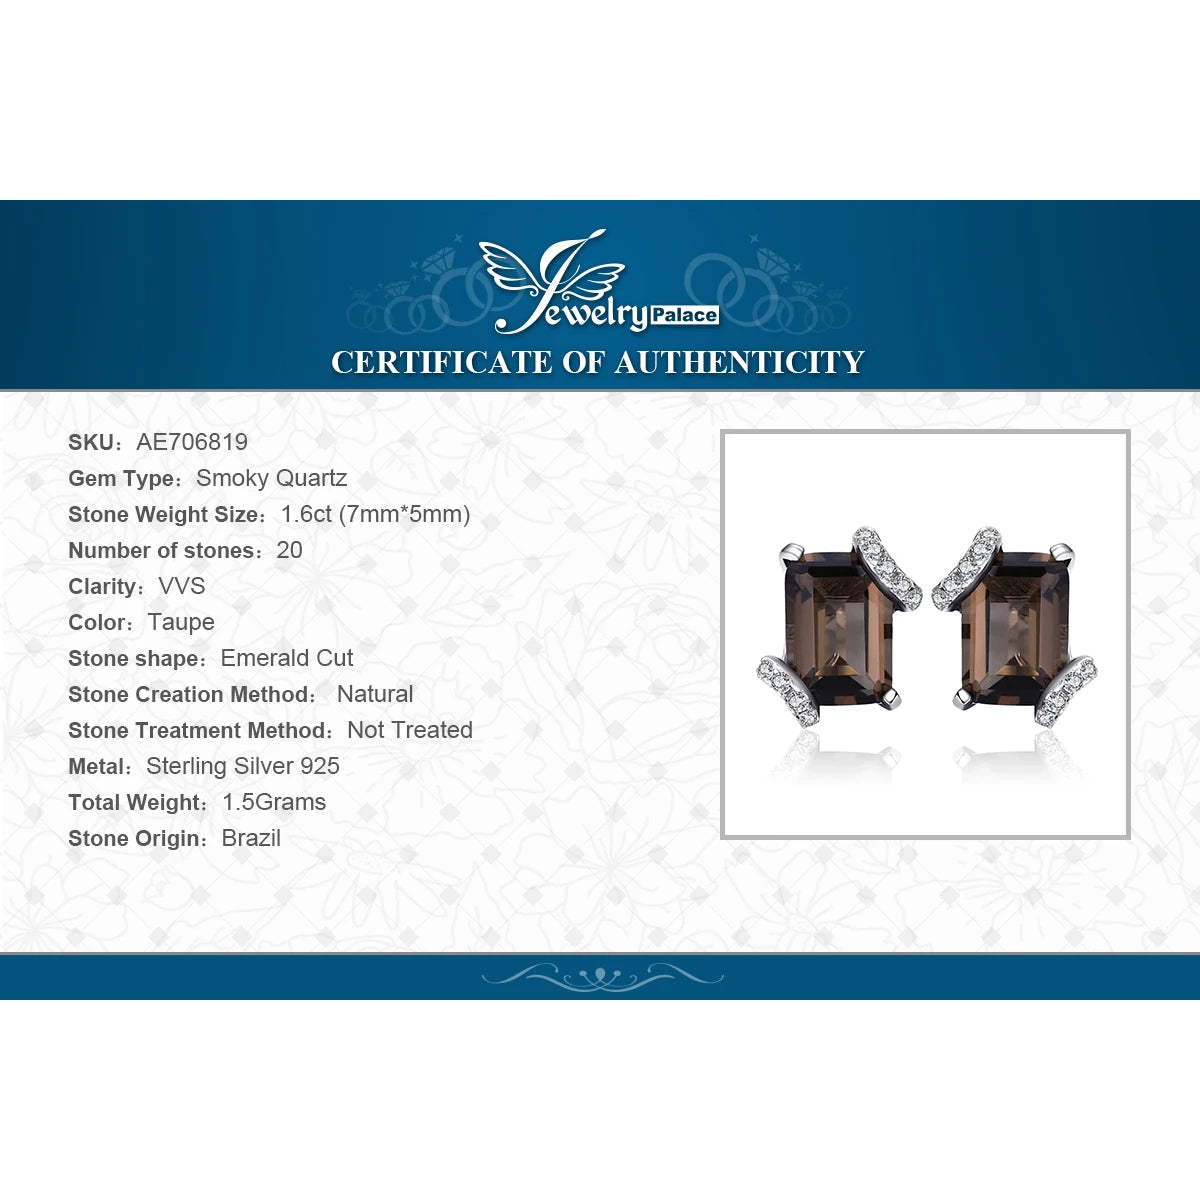 Jewelrypalace Emerald Cut 1.6ct Genuine Smoky Quartz 925 Sterling Silver Earrings for Woman Statement Gemstone Jewelry Gift